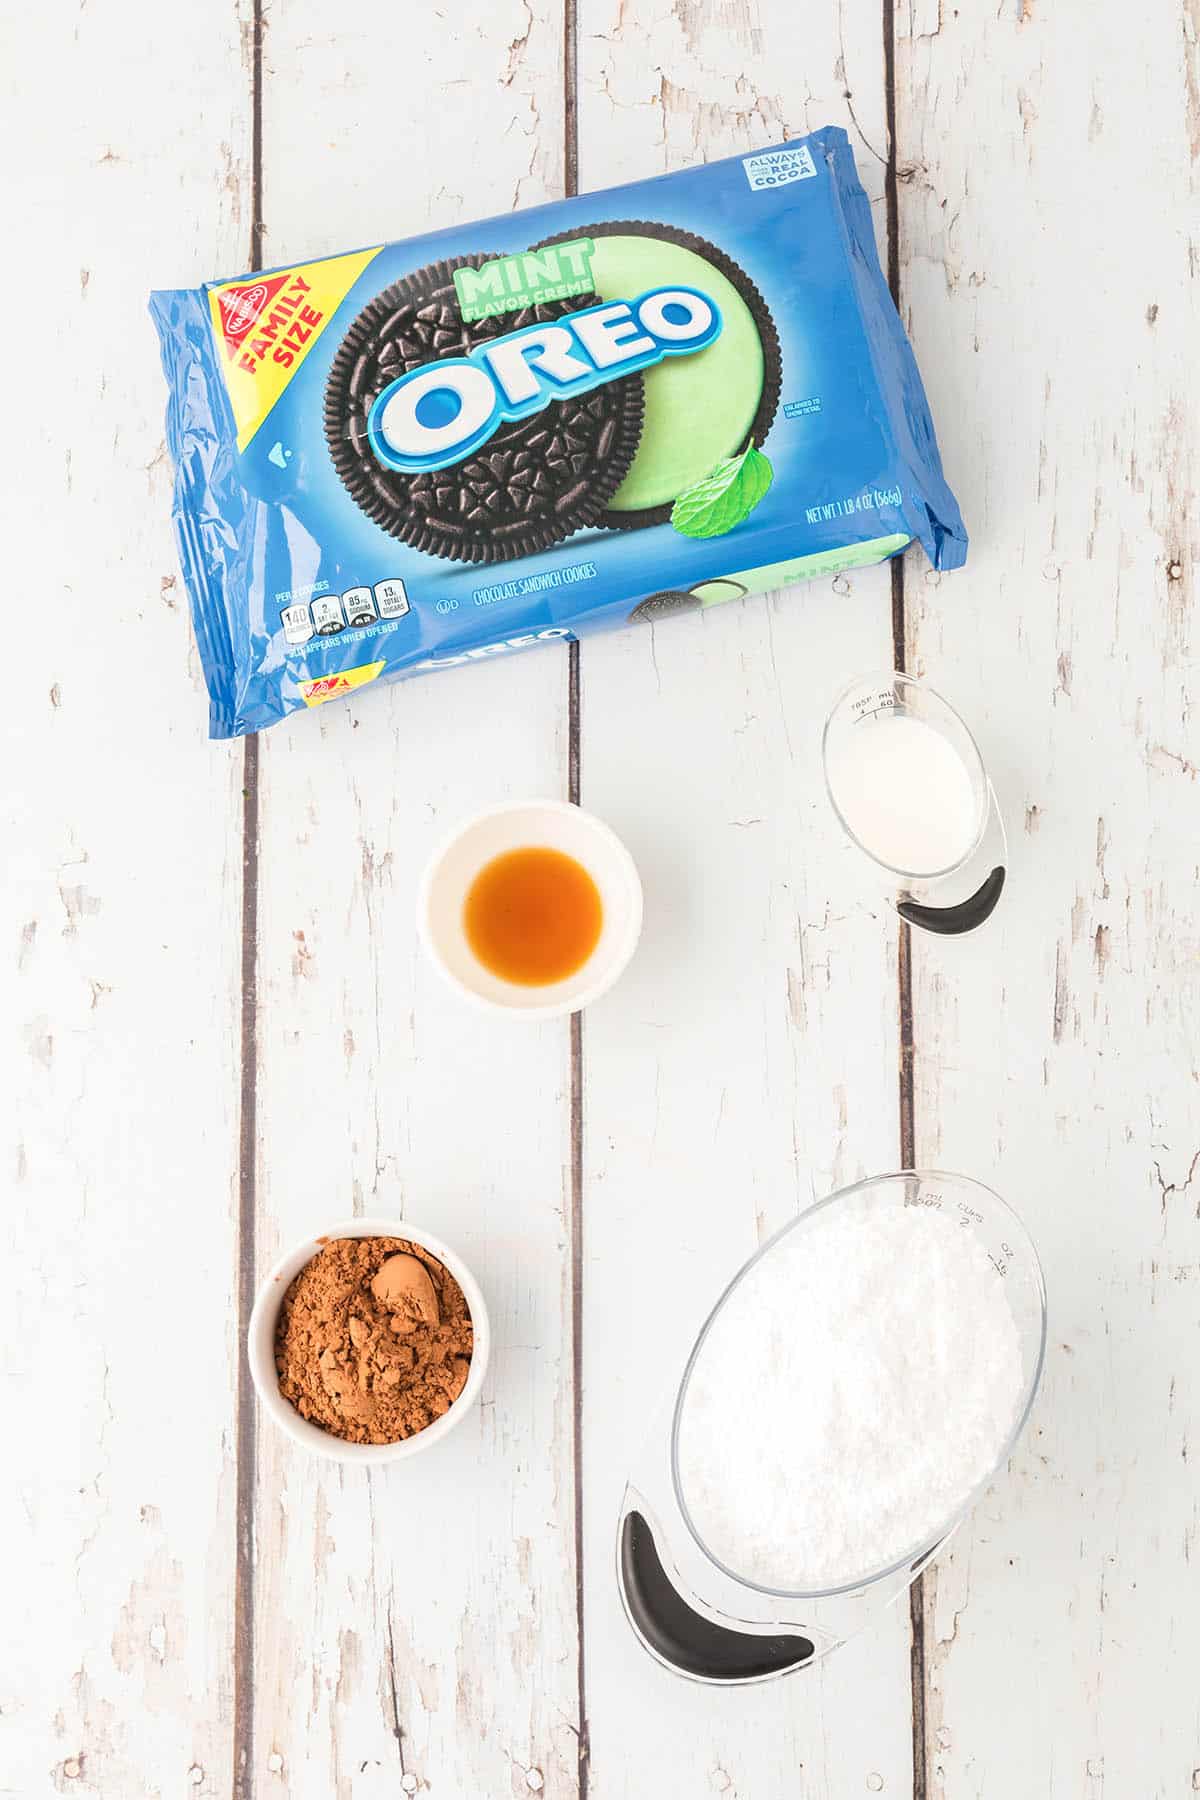 A package of mint oreo cookies, a measuring cup of powdered sugar, a ramekin of cocoa powder, a small bowl of vanilla extract and a small measuring cup of milk on a wooden countertop.